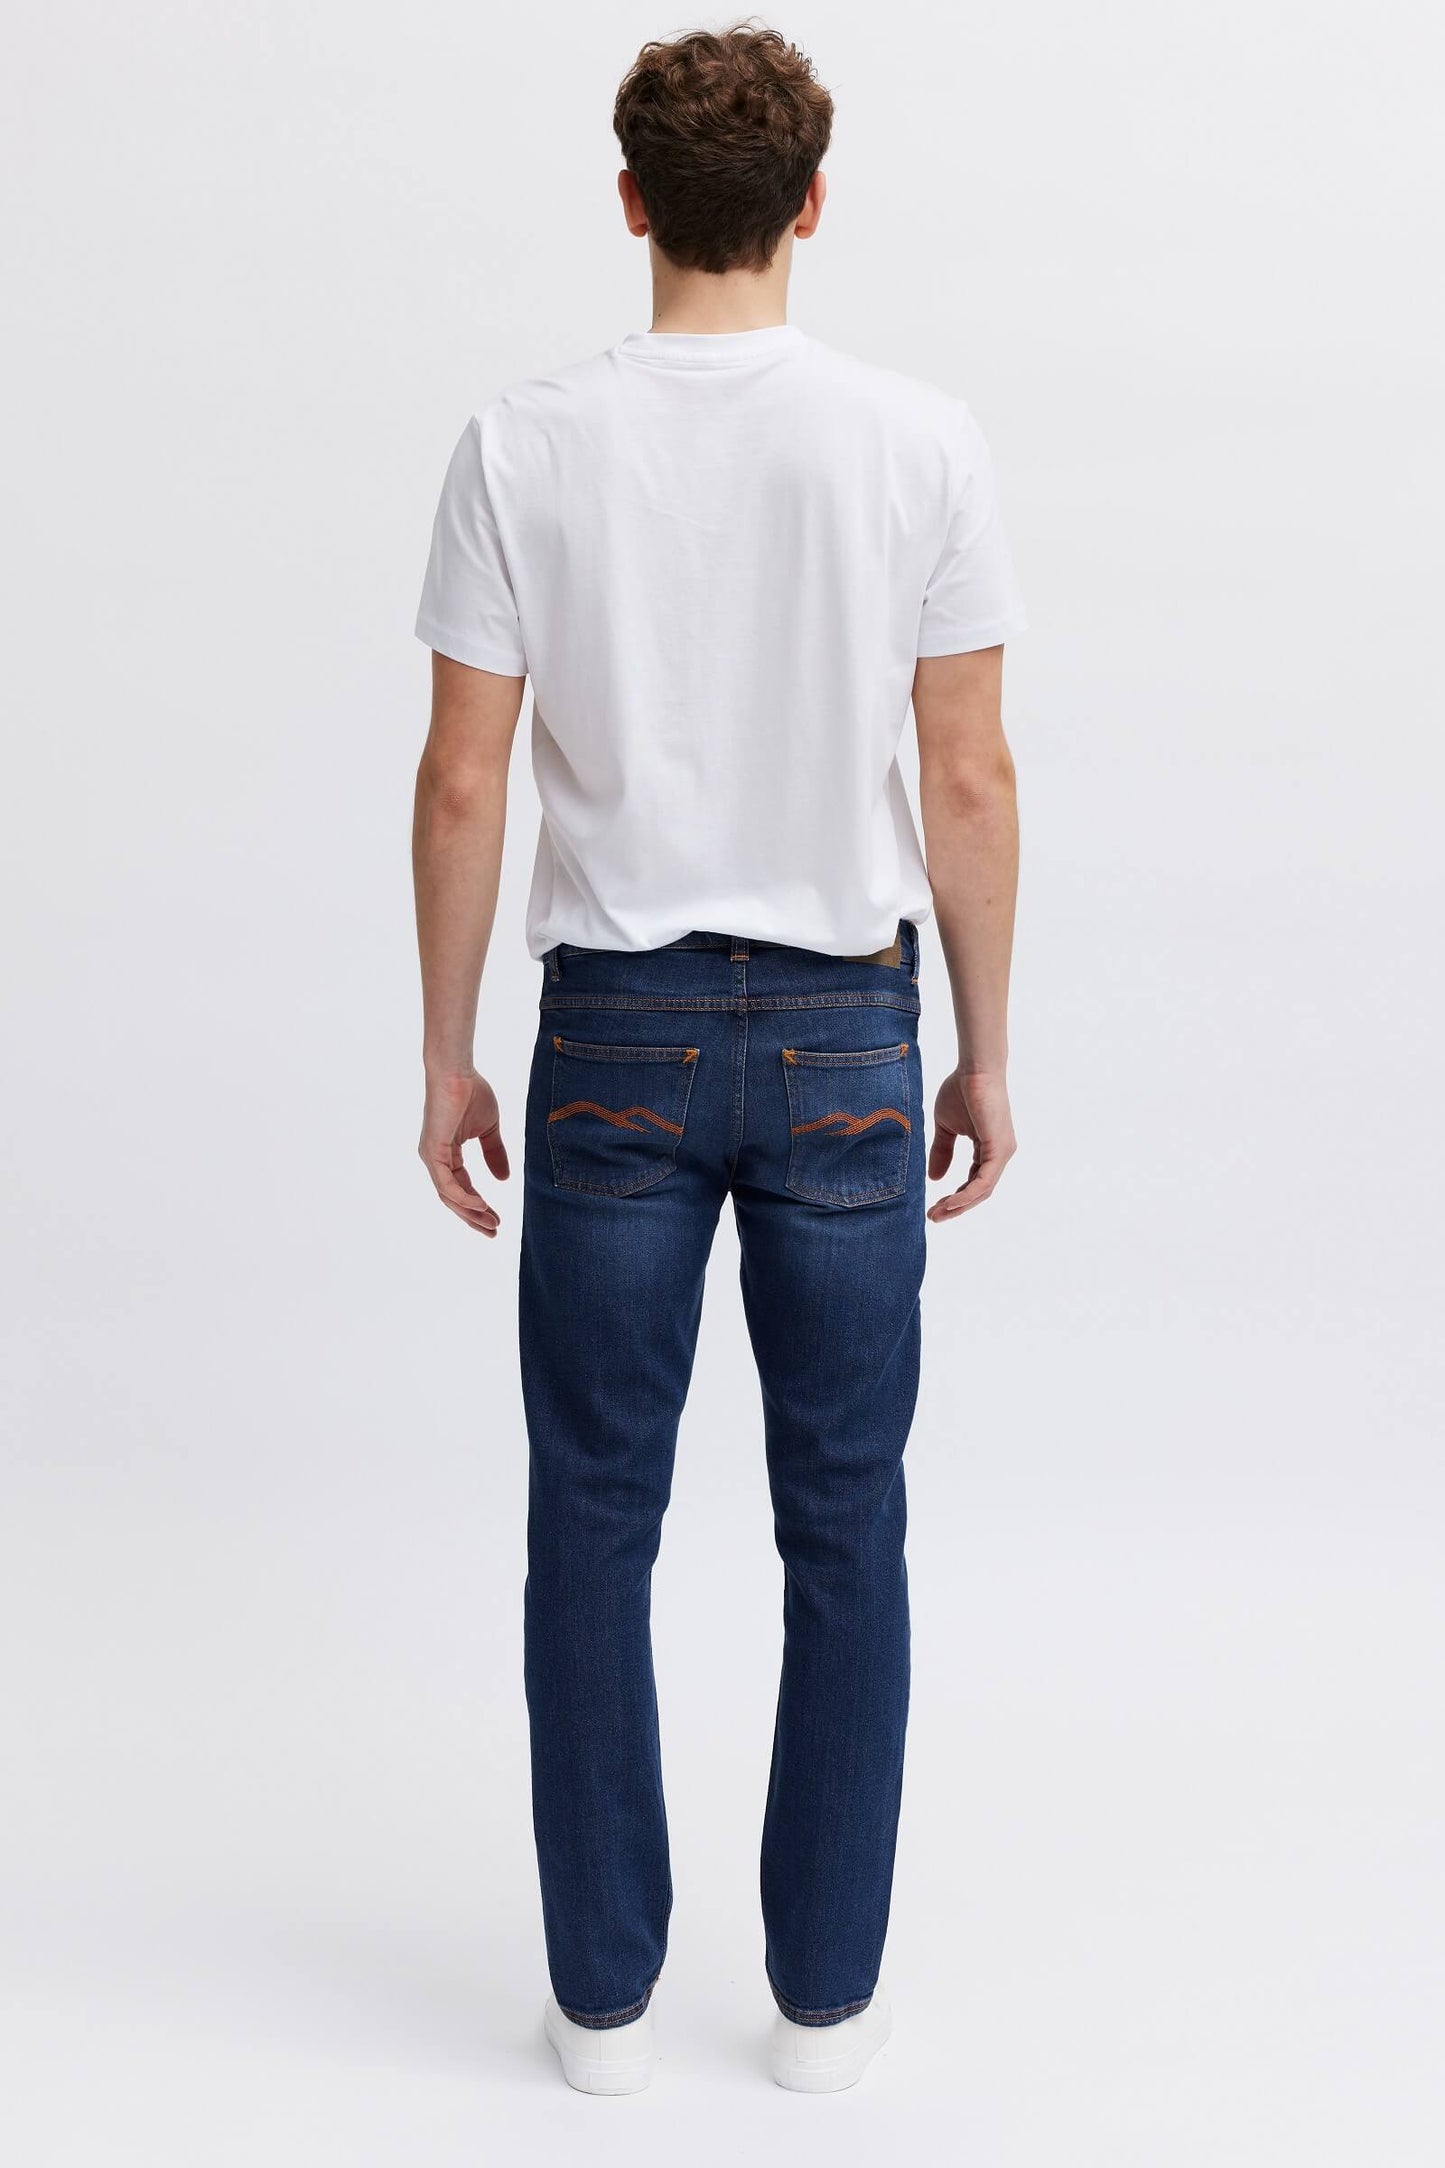 Eco-friendly jeans for men - organic and comfy denim 